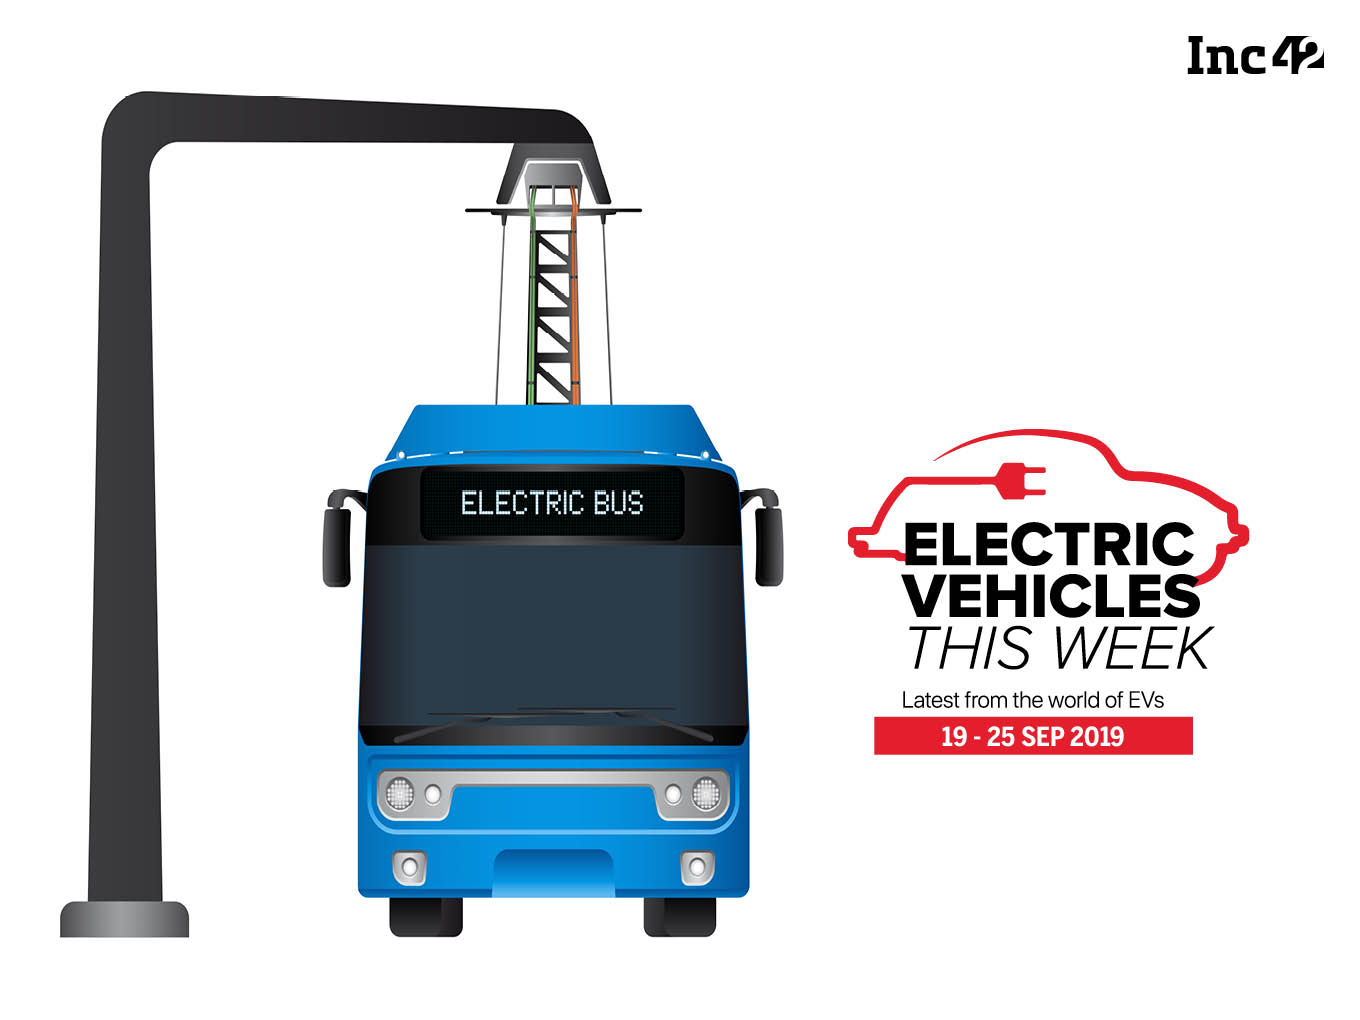 Electric Vehicles This Week: Himachal Pradesh State EV Policy And More